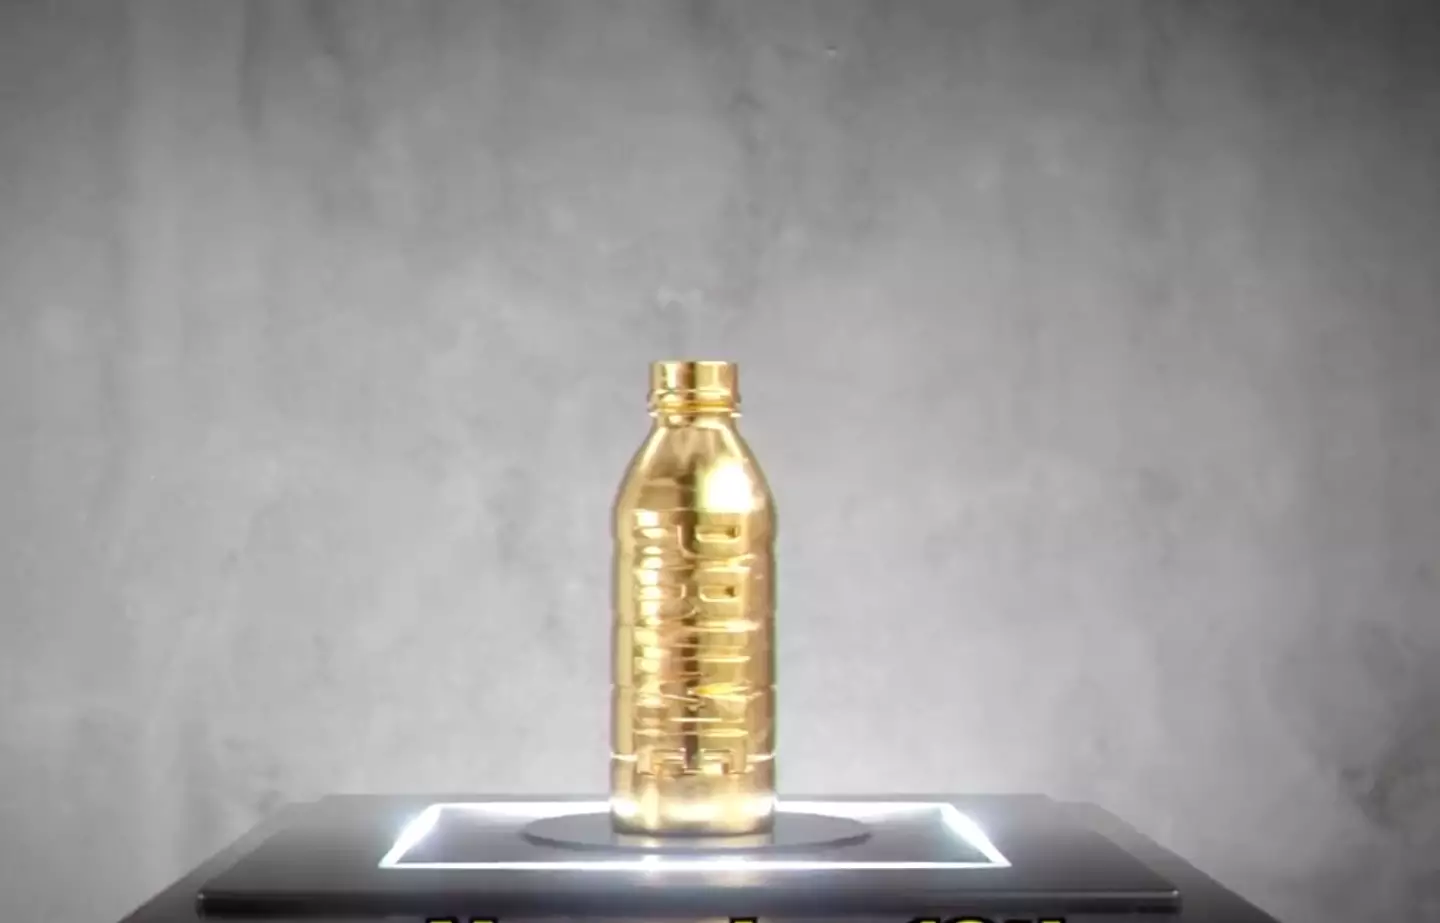 The gold Prime bottle will be encased in bulletproof glass and can only be unlocked with the correct six-digit code.